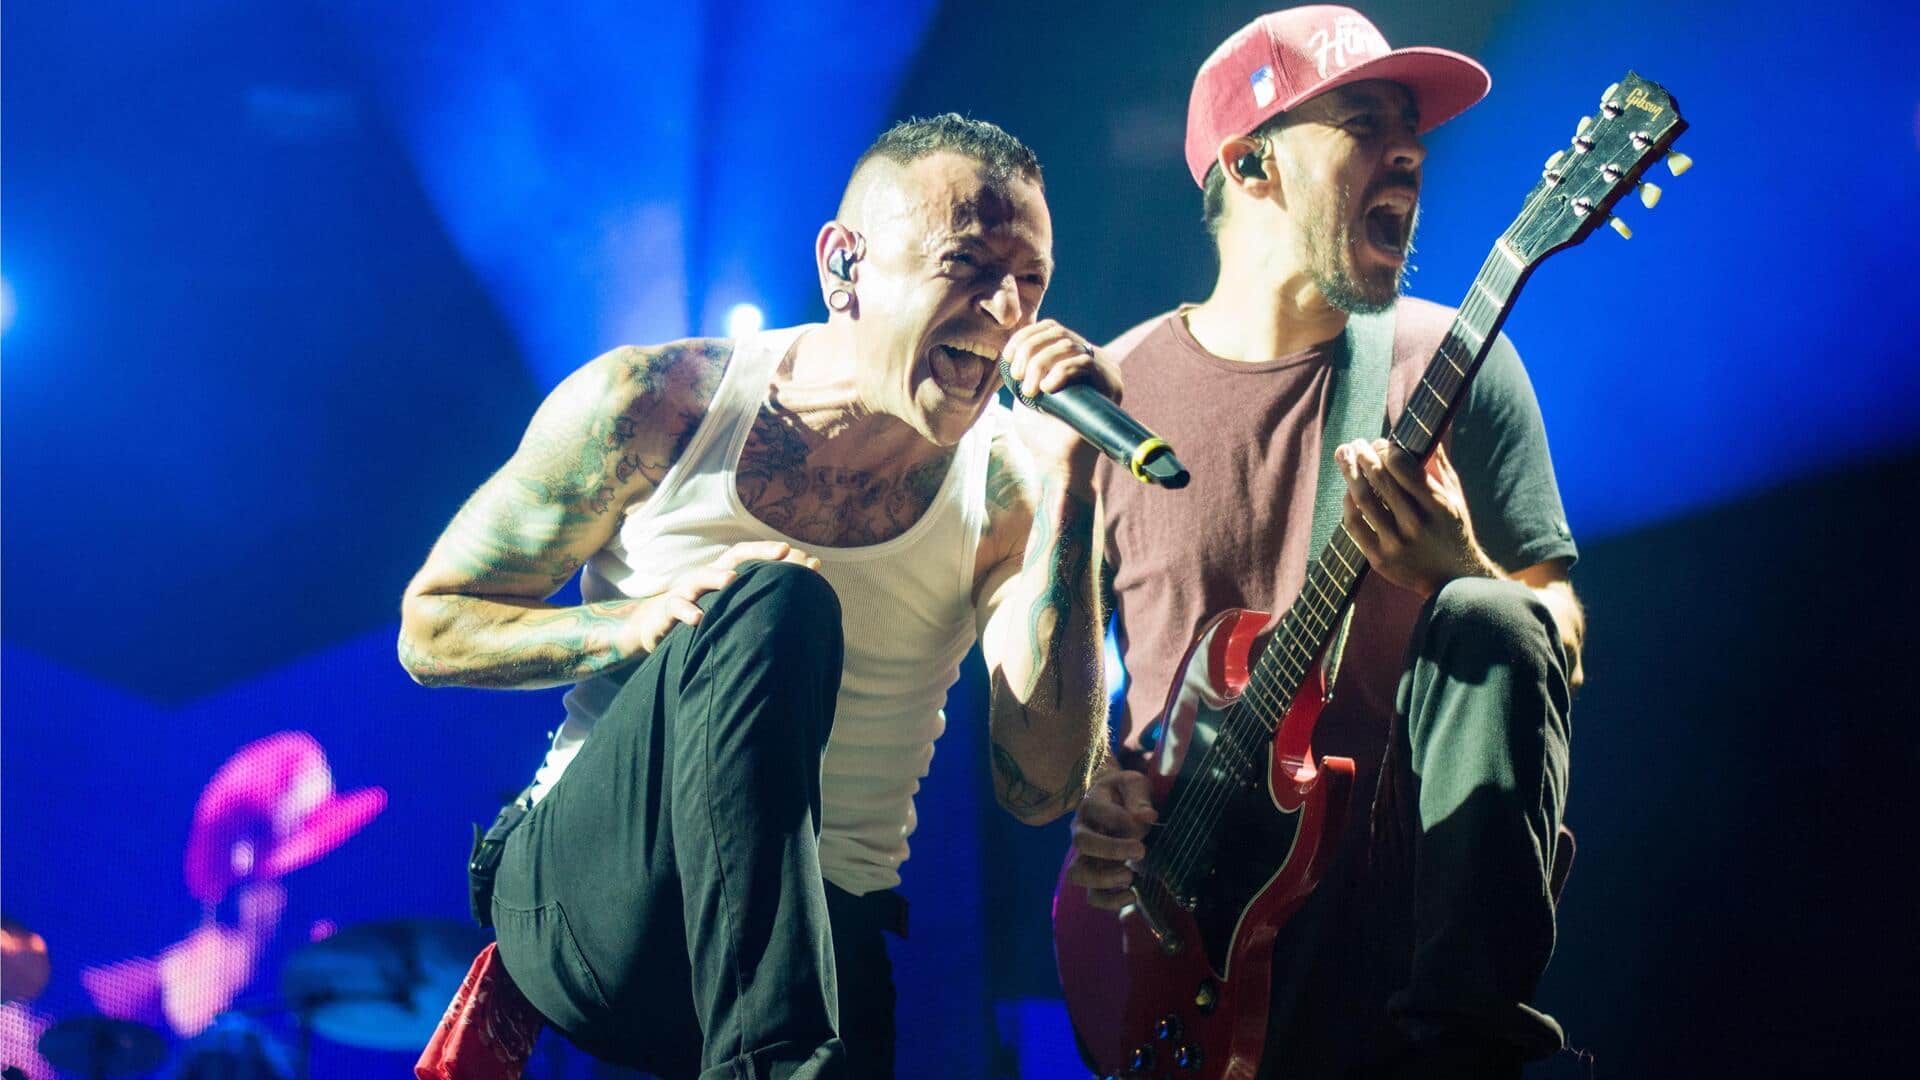 'Numb' to 'In the End': Linkin Park's best songs